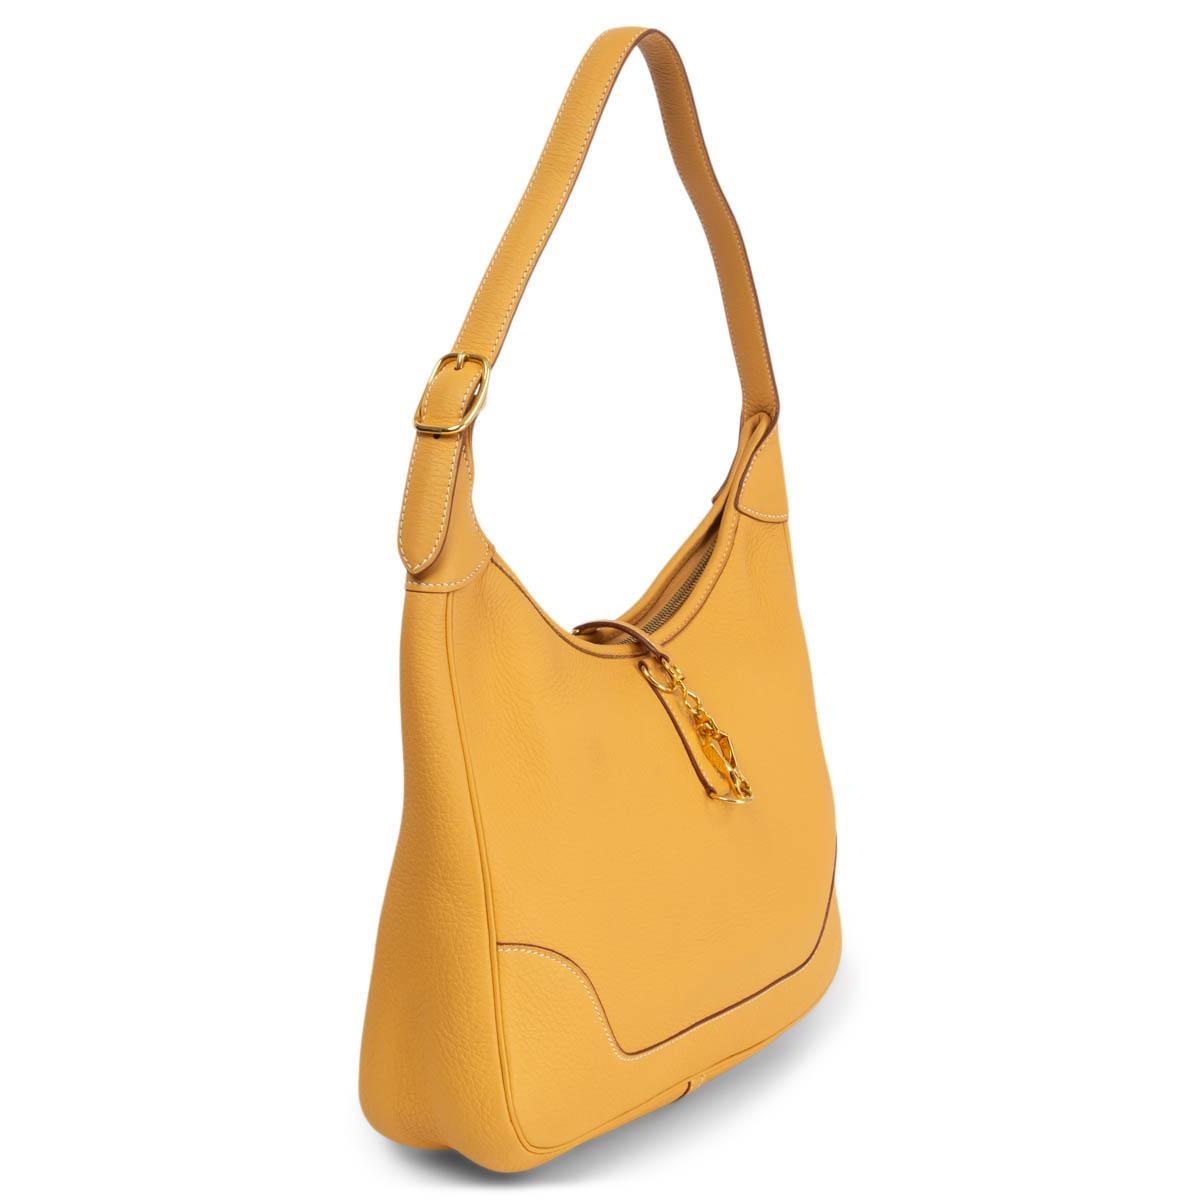 100% authentic Hermès Trim 31 hobo in Curry yellow soft Taurillon Clemence leather featuring gold-tone hardware. Designed with adjustable shoulder handle, clasp opening with top zipper closure and gusseted sides. Unlined interior with a one slip